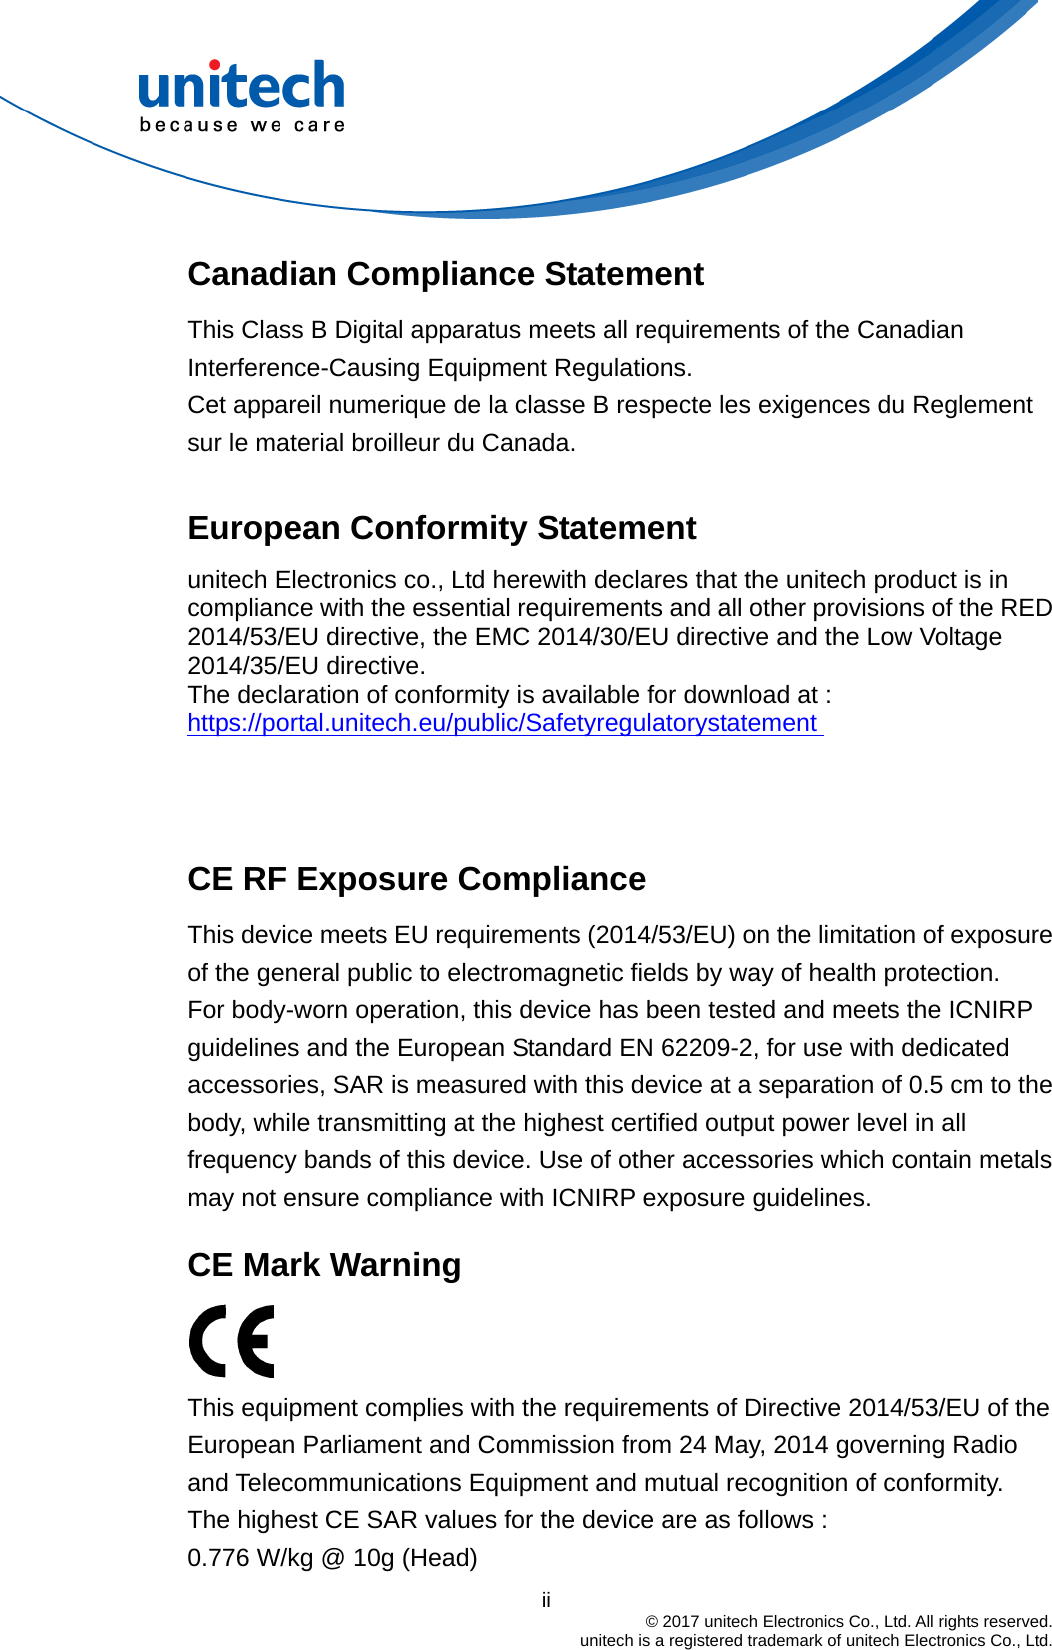  Canadian Compliance Statement This Class B Digital apparatus meets all requirements of the Canadian Interference-Causing Equipment Regulations. Cet appareil numerique de la classe B respecte les exigences du Reglement sur le material broilleur du Canada.  European Conformity Statement unitech Electronics co., Ltd herewith declares that the unitech product is in compliance with the essential requirements and all other provisions of the RED 2014/53/EU directive, the EMC 2014/30/EU directive and the Low Voltage 2014/35/EU directive. The declaration of conformity is available for download at :   https://portal.unitech.eu/public/Safetyregulatorystatement    CE RF Exposure Compliance   This device meets EU requirements (2014/53/EU) on the limitation of exposure of the general public to electromagnetic fields by way of health protection. For body-worn operation, this device has been tested and meets the ICNIRP guidelines and the European Standard EN 62209-2, for use with dedicated accessories, SAR is measured with this device at a separation of 0.5 cm to the body, while transmitting at the highest certified output power level in all frequency bands of this device. Use of other accessories which contain metals may not ensure compliance with ICNIRP exposure guidelines.    CE Mark Warning    This equipment complies with the requirements of Directive 2014/53/EU of the European Parliament and Commission from 24 May, 2014 governing Radio and Telecommunications Equipment and mutual recognition of conformity.   The highest CE SAR values for the device are as follows : 0.776 W/kg @ 10g (Head)                                         ii  © 2017 unitech Electronics Co., Ltd. All rights reserved.   unitech is a registered trademark of unitech Electronics Co., Ltd. 